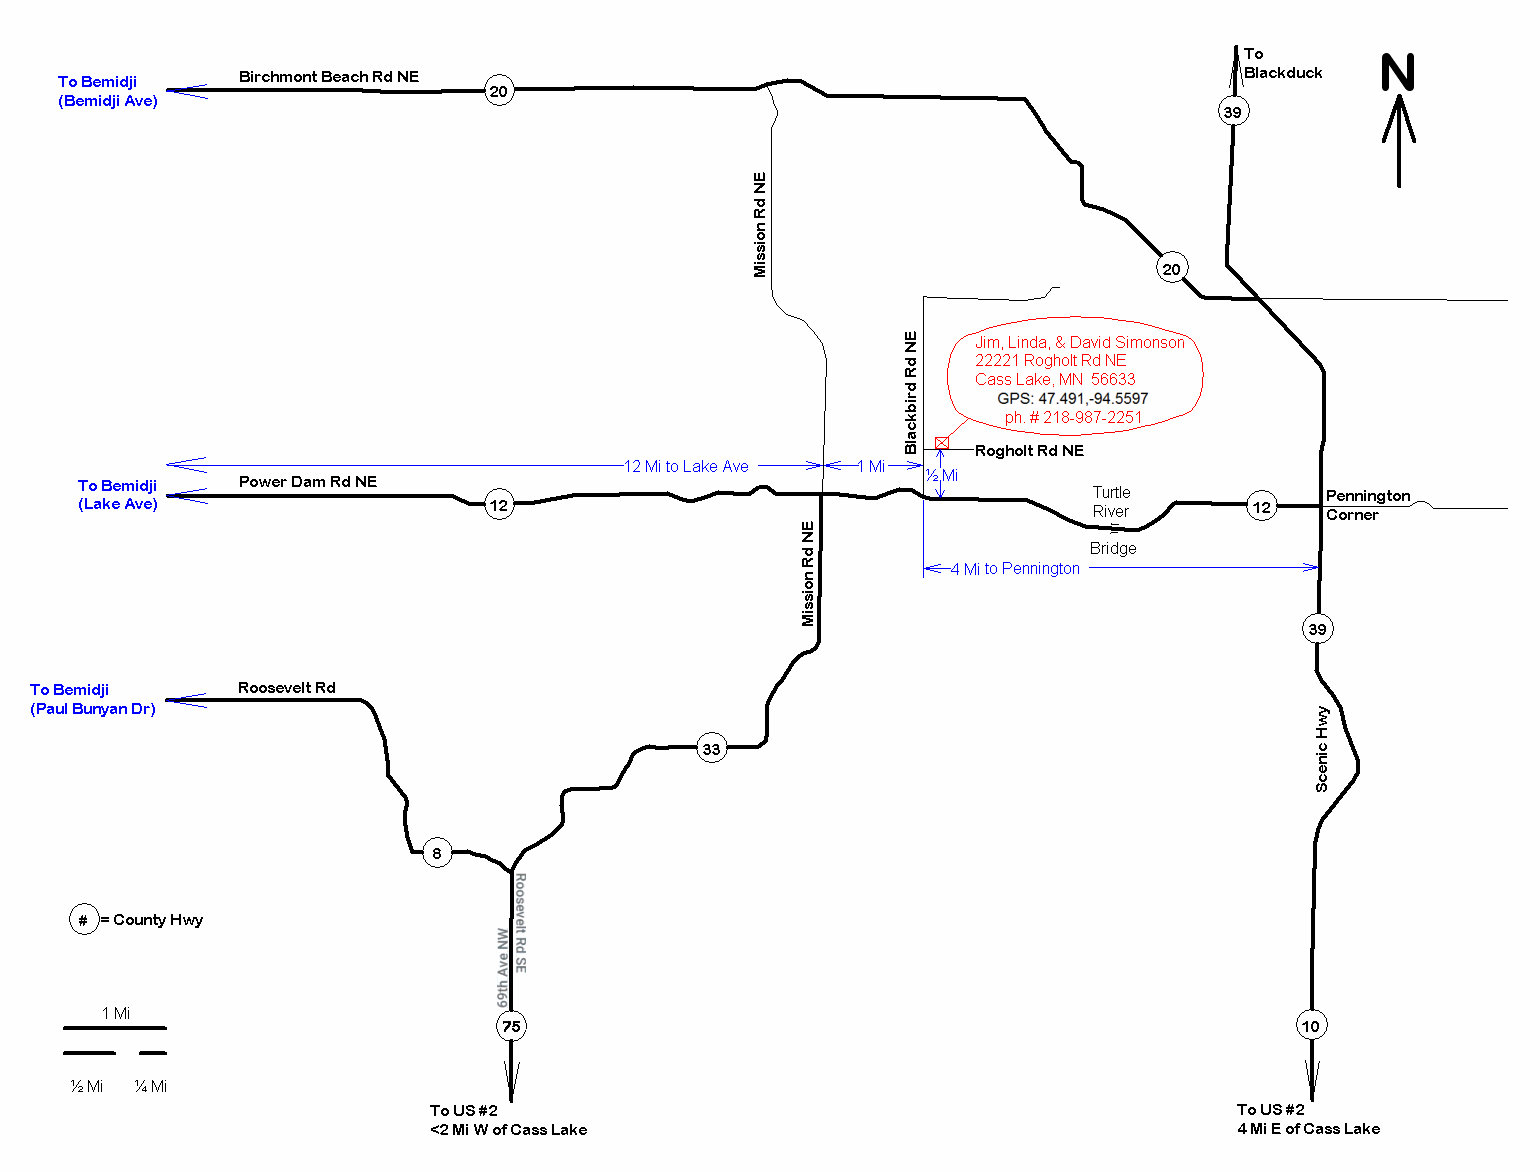 click for larger area map